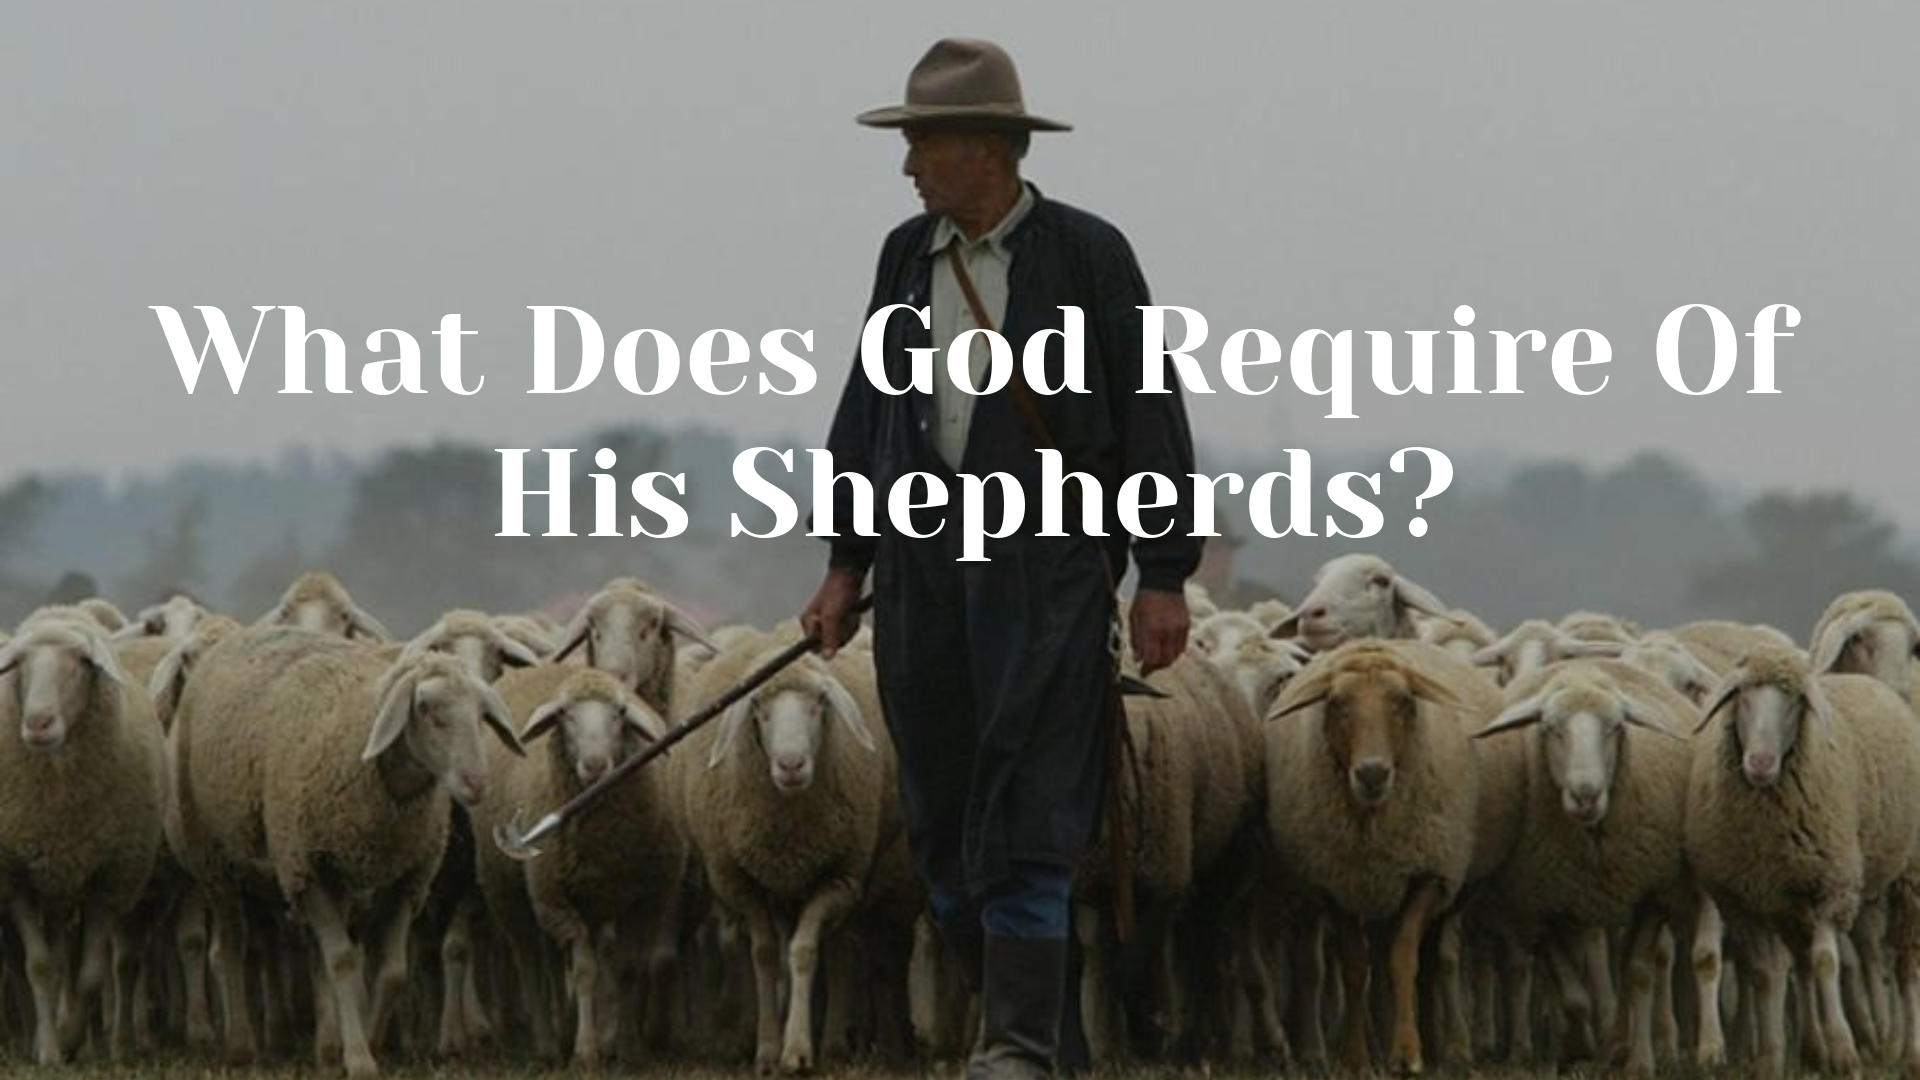 What Does God Require of His Shepherds